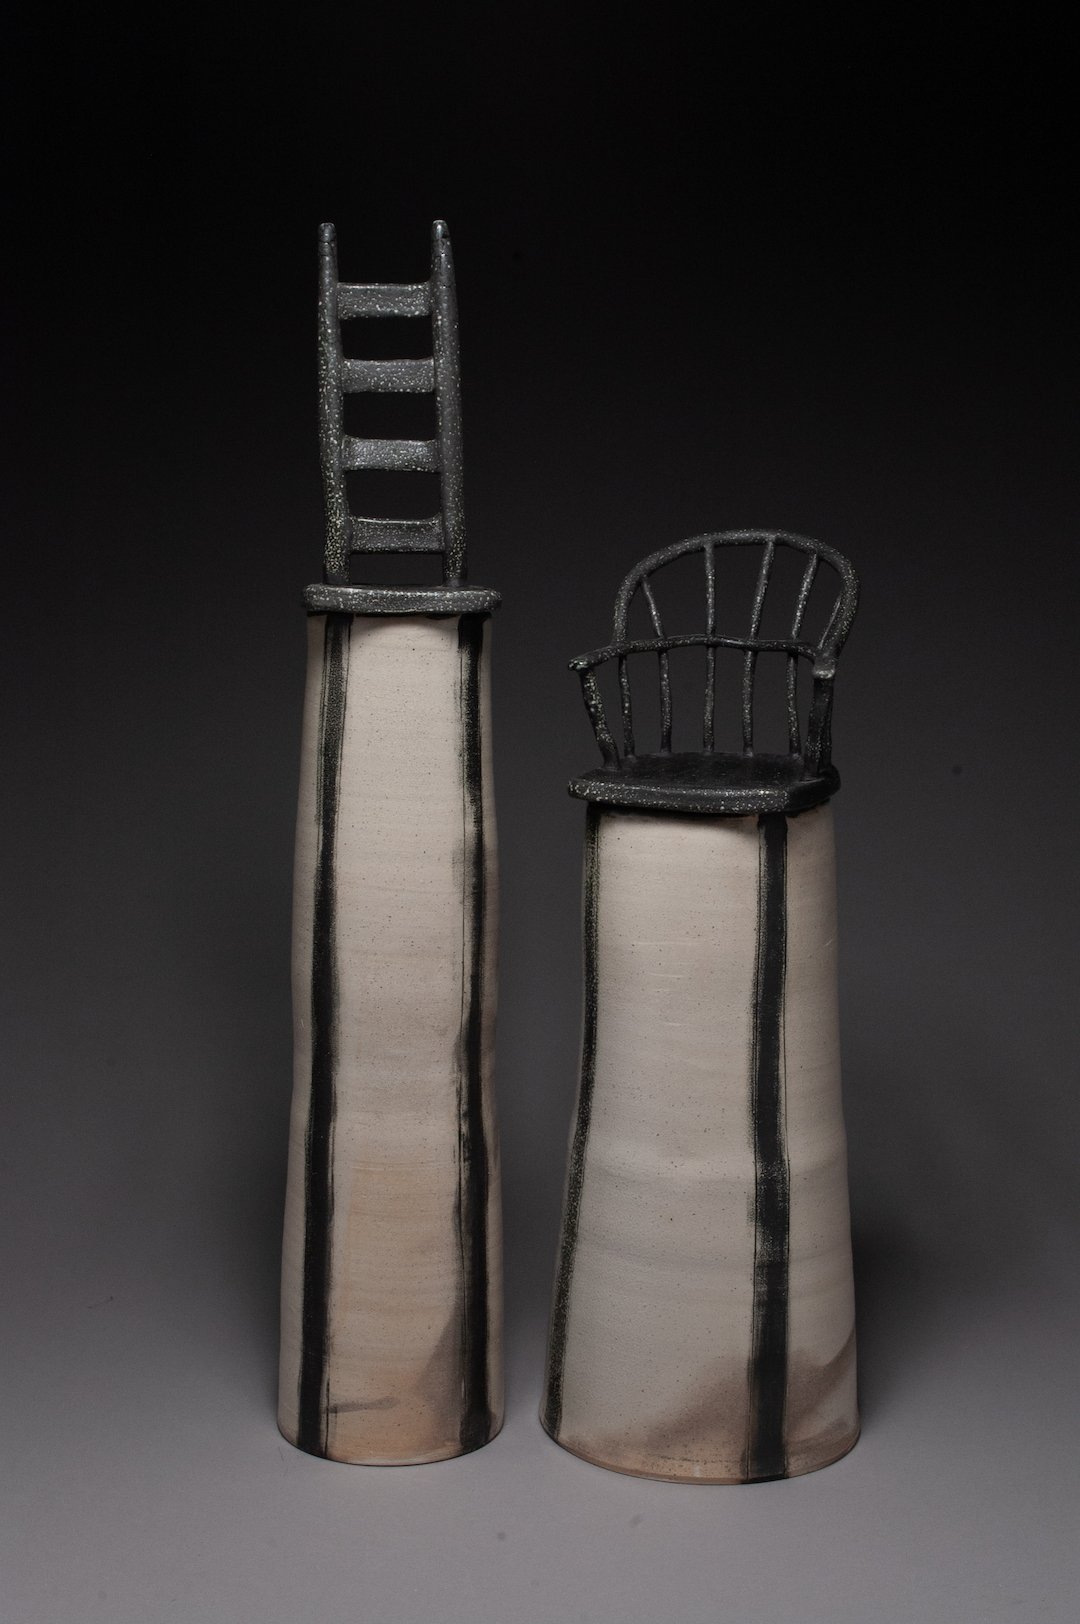    Chairs  , 20”h x 10”w x 5.25”d, porcelain, soda fired 